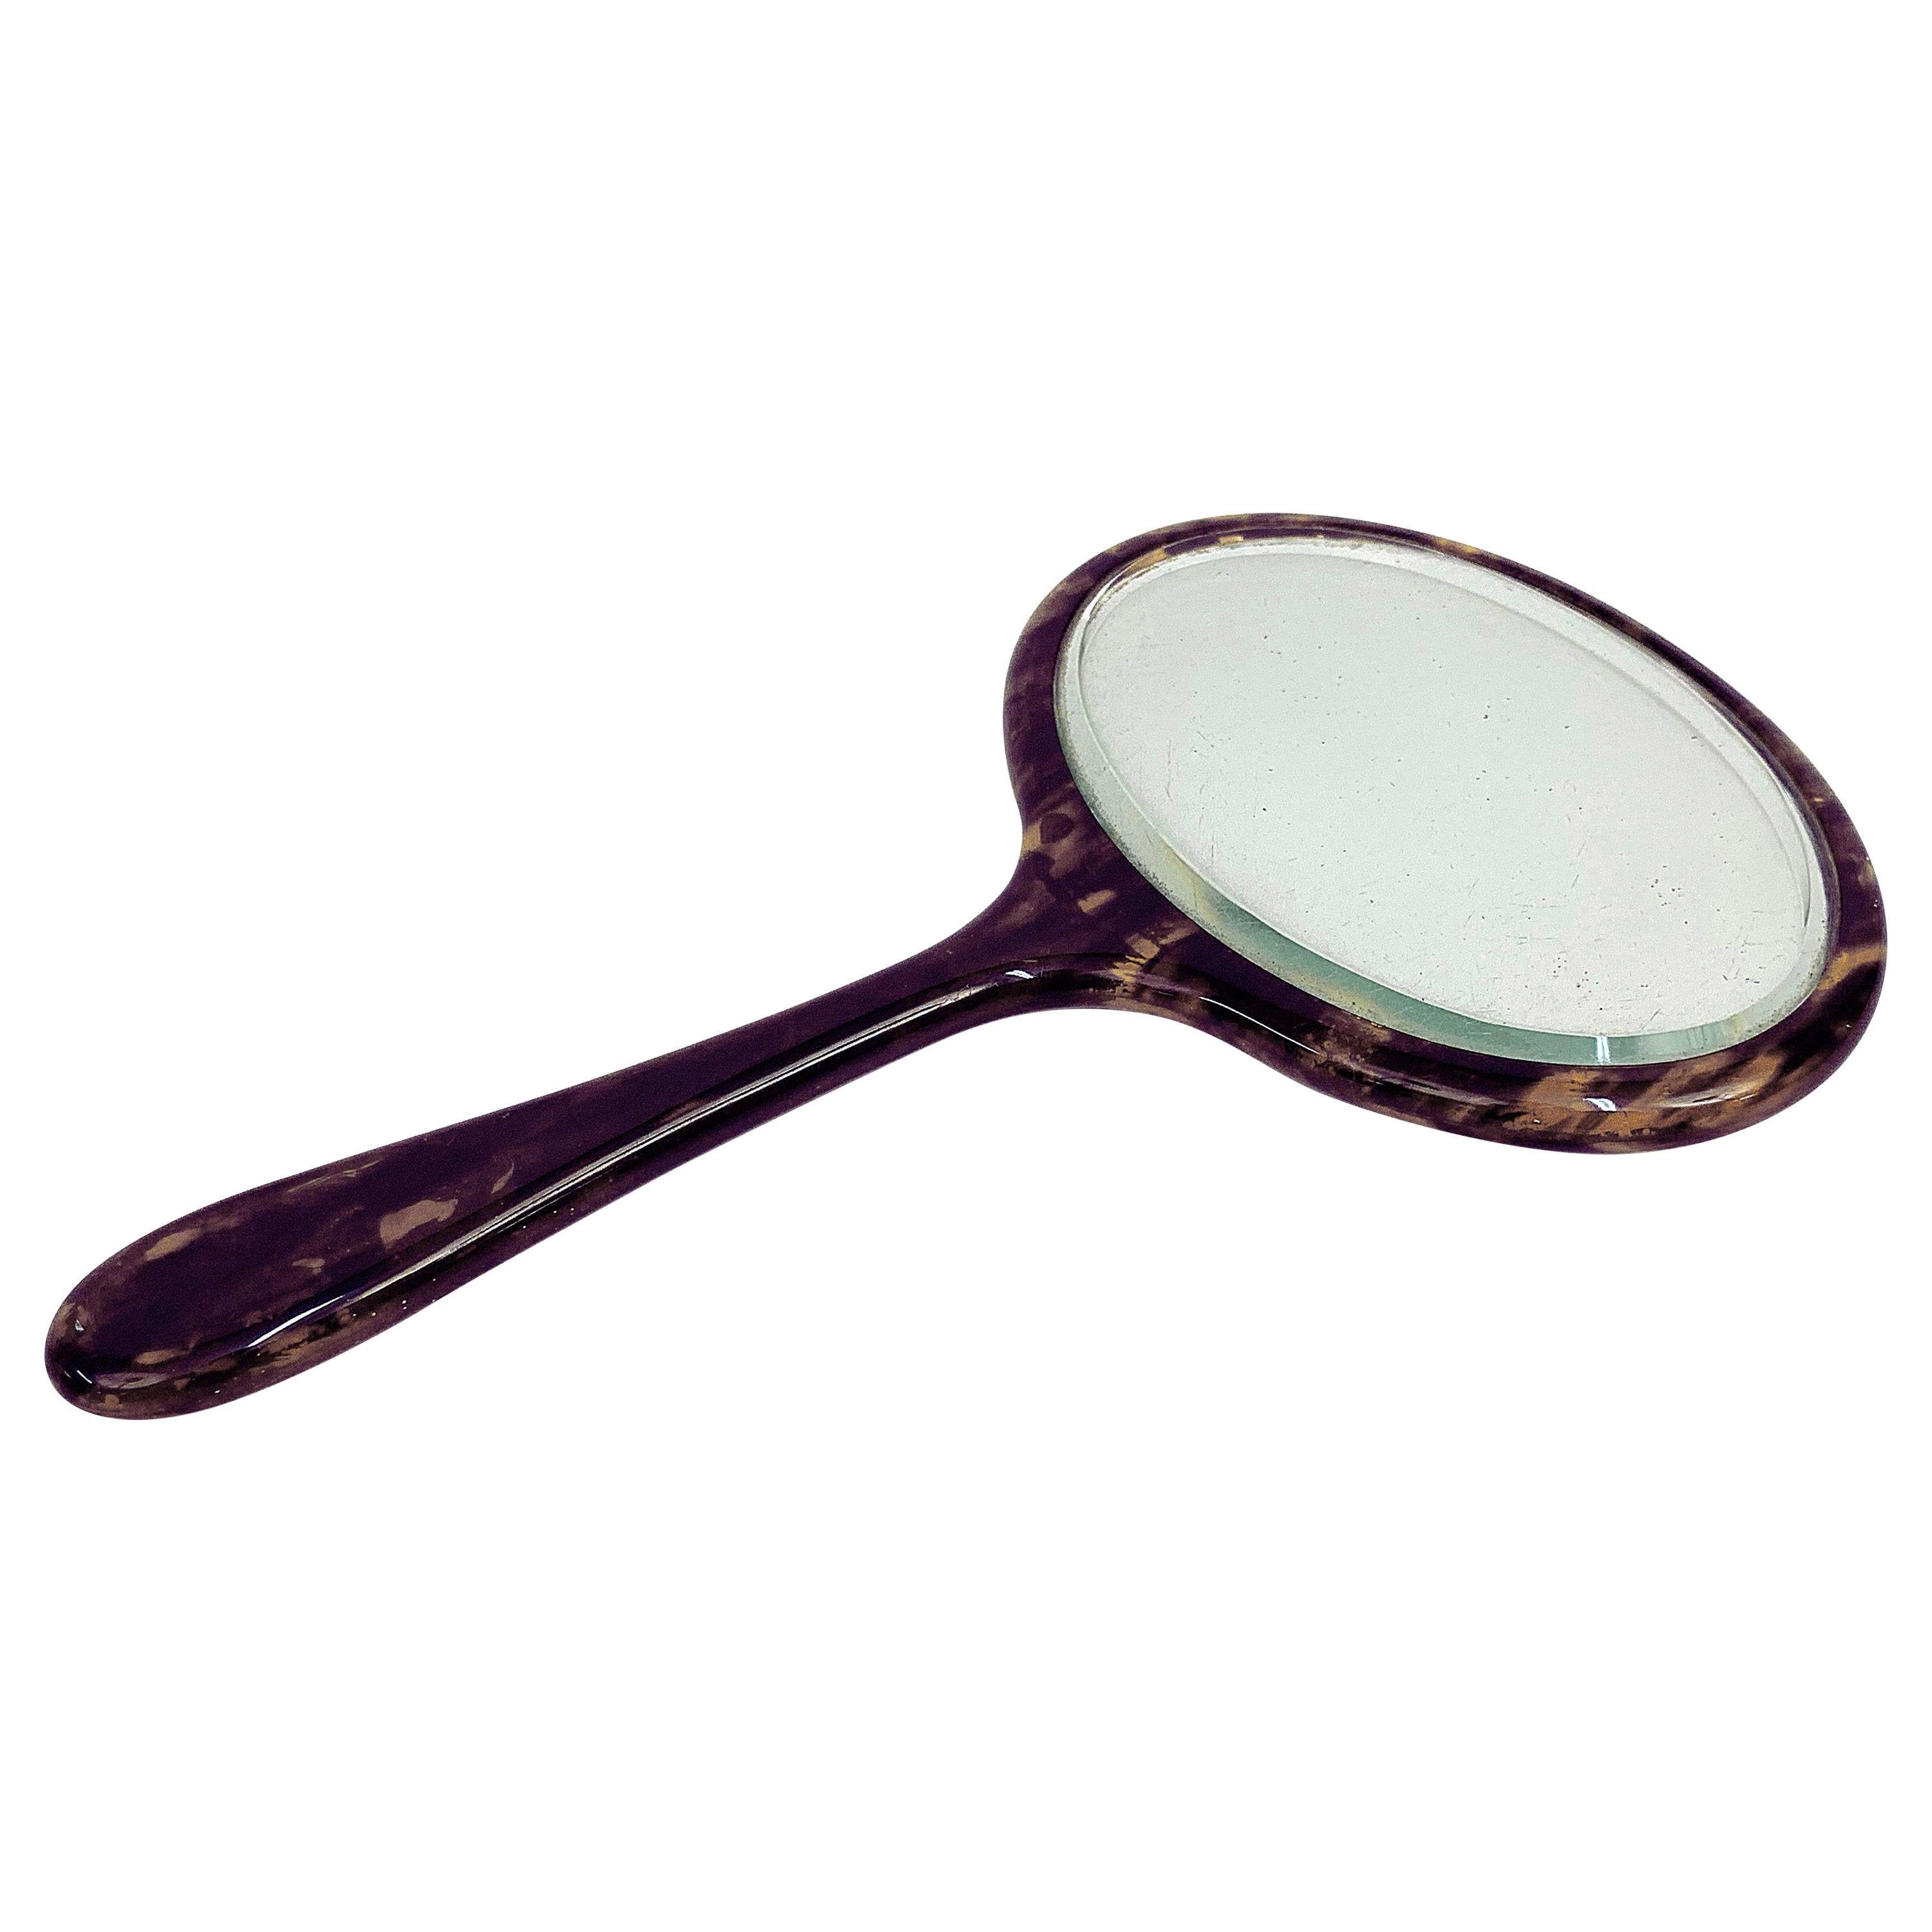 Midcentury English Oval Faux Tortoiseshell Portable Mirror, 1950s For Sale